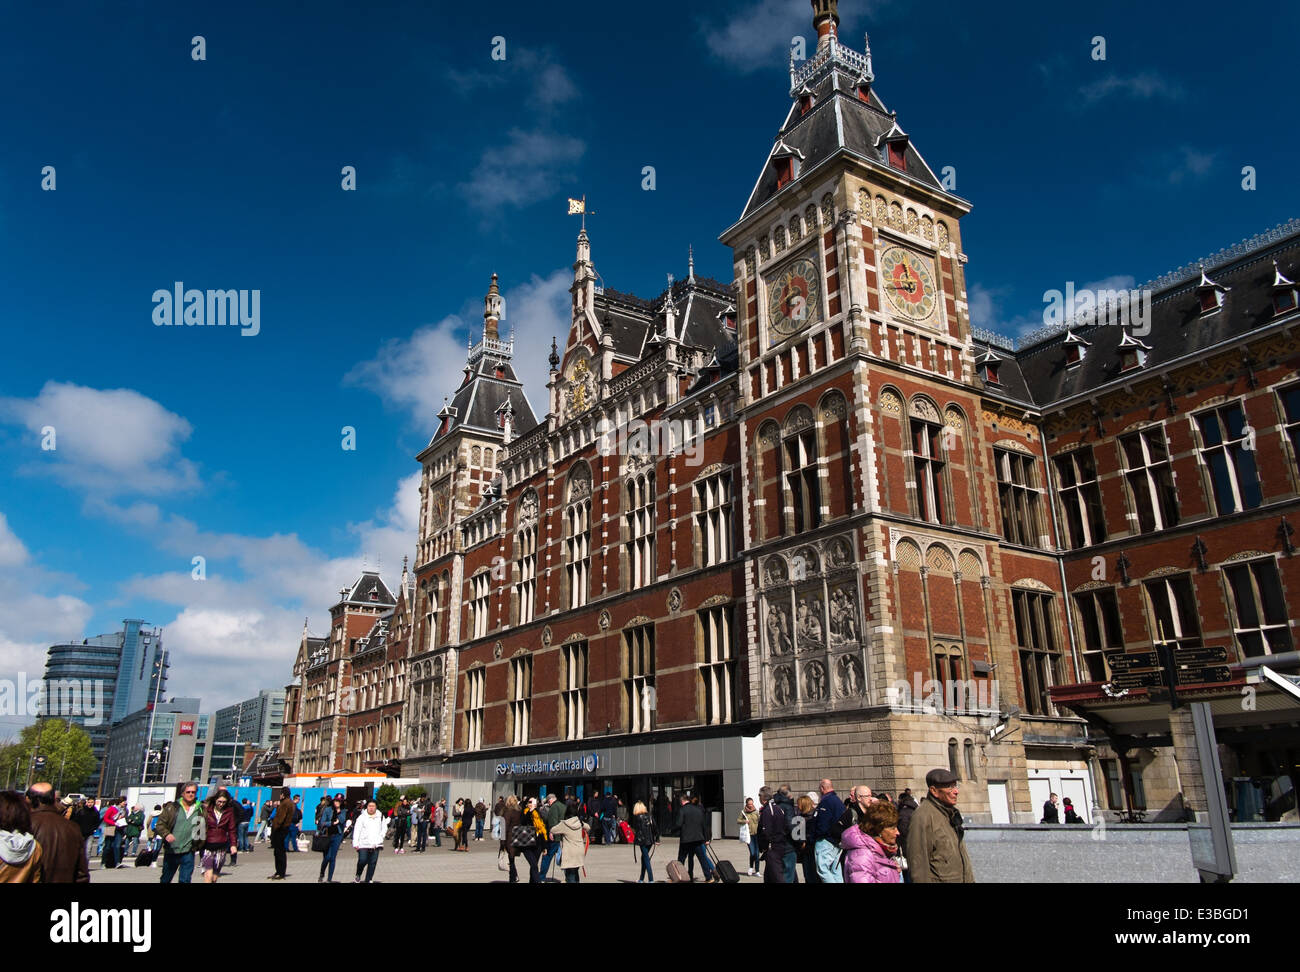 Amsterdams central station Stock Photo